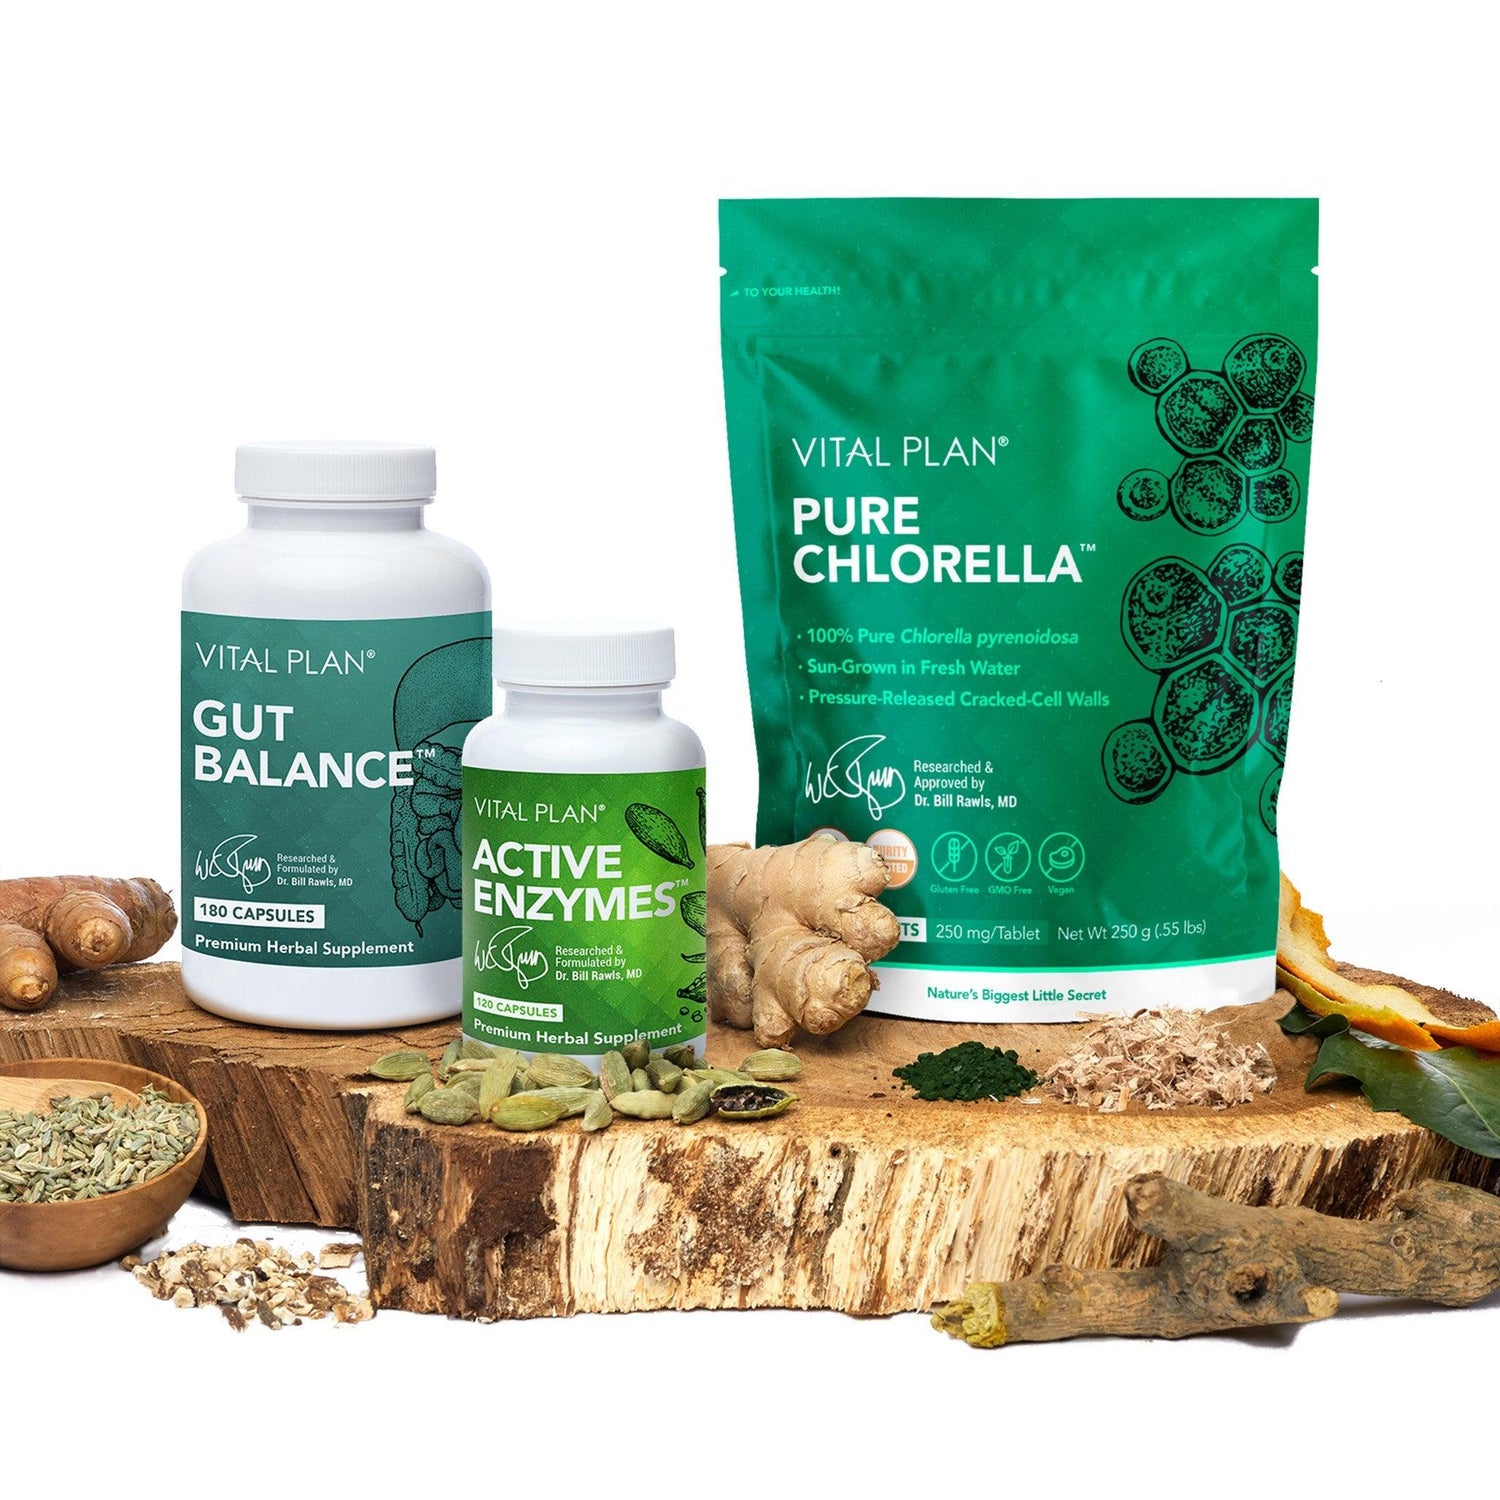 GUT REVIVAL KIT™ +15% Off (Subscribe & Save) - Vital Plan